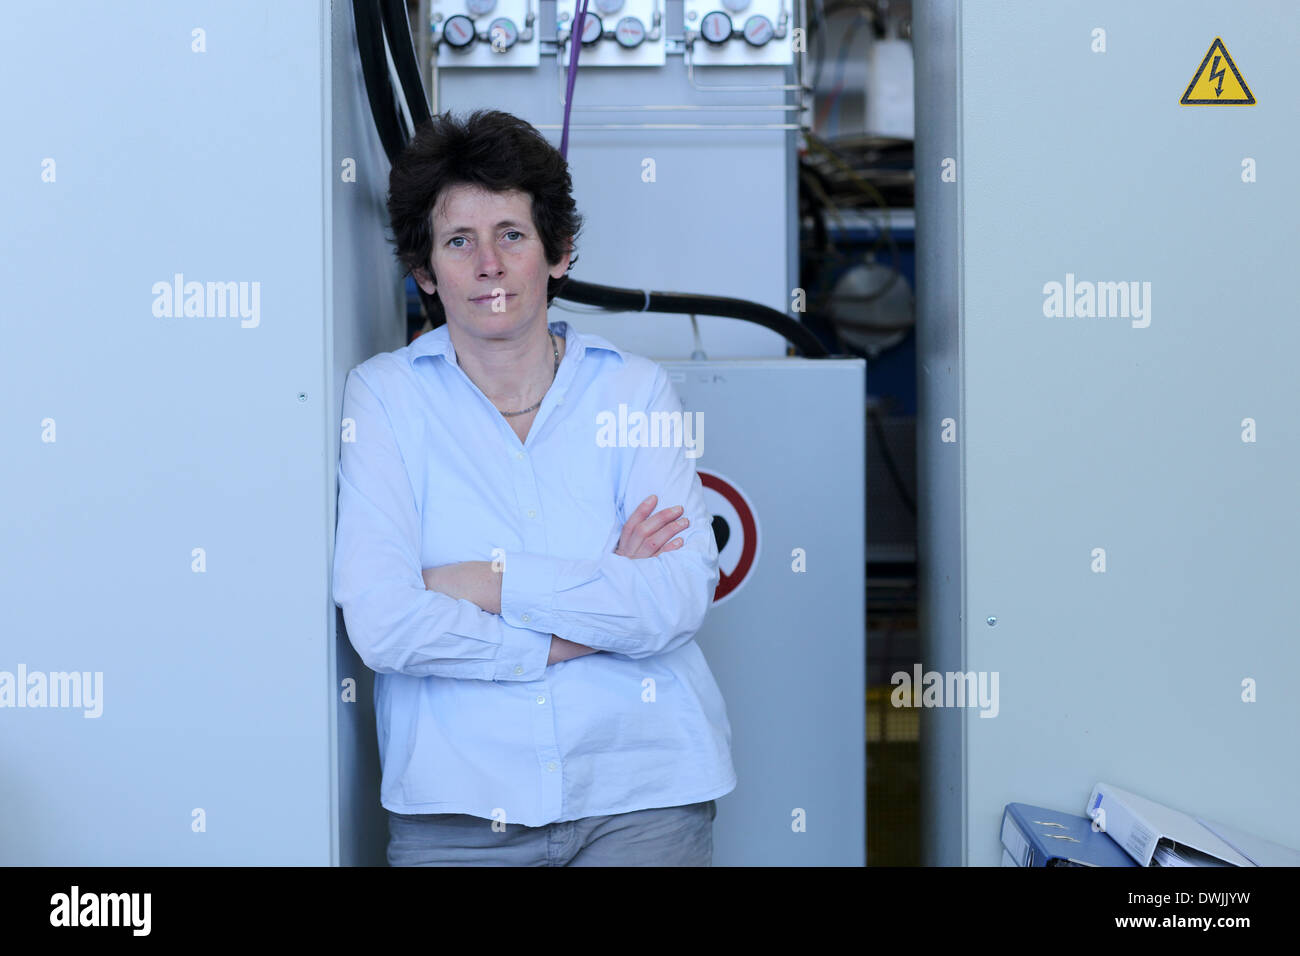 scientist technical person woman middle age working in a technical lab Stock Photo